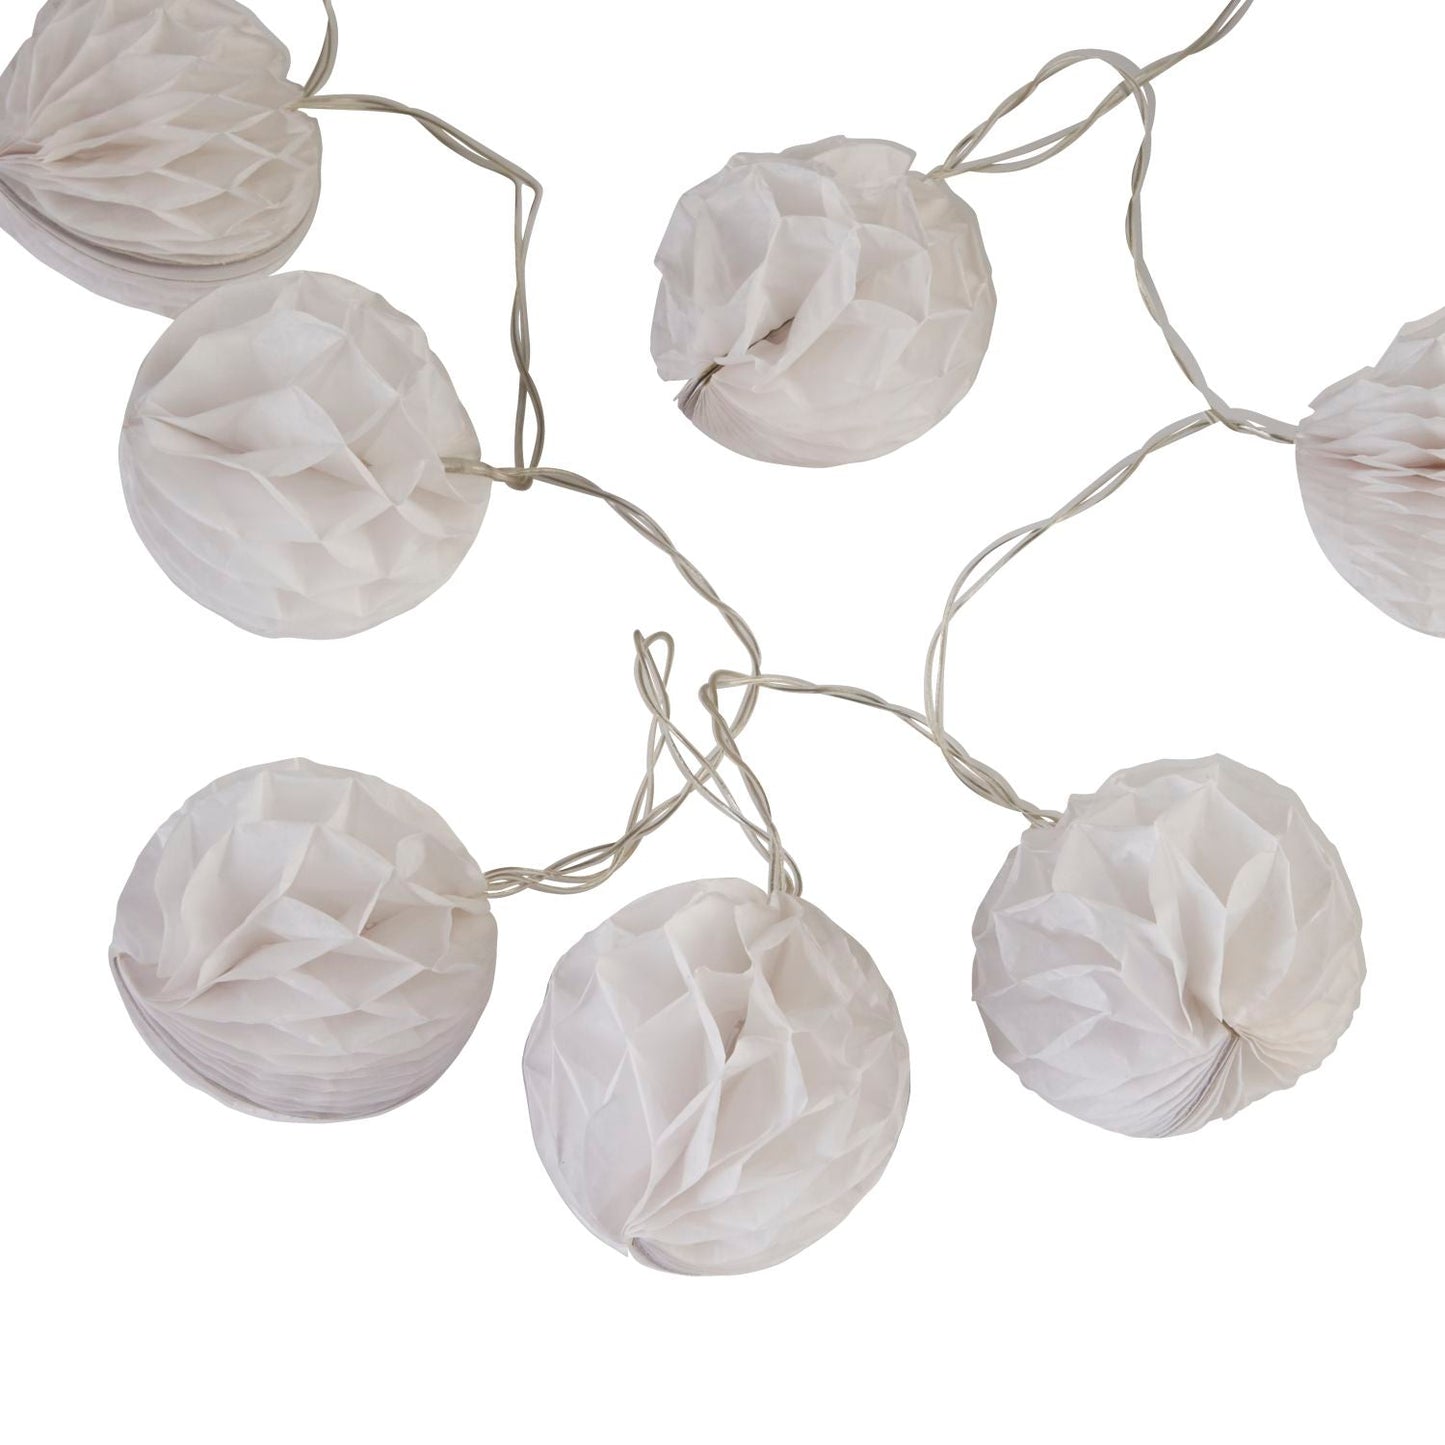 White Paper Shade String Lights